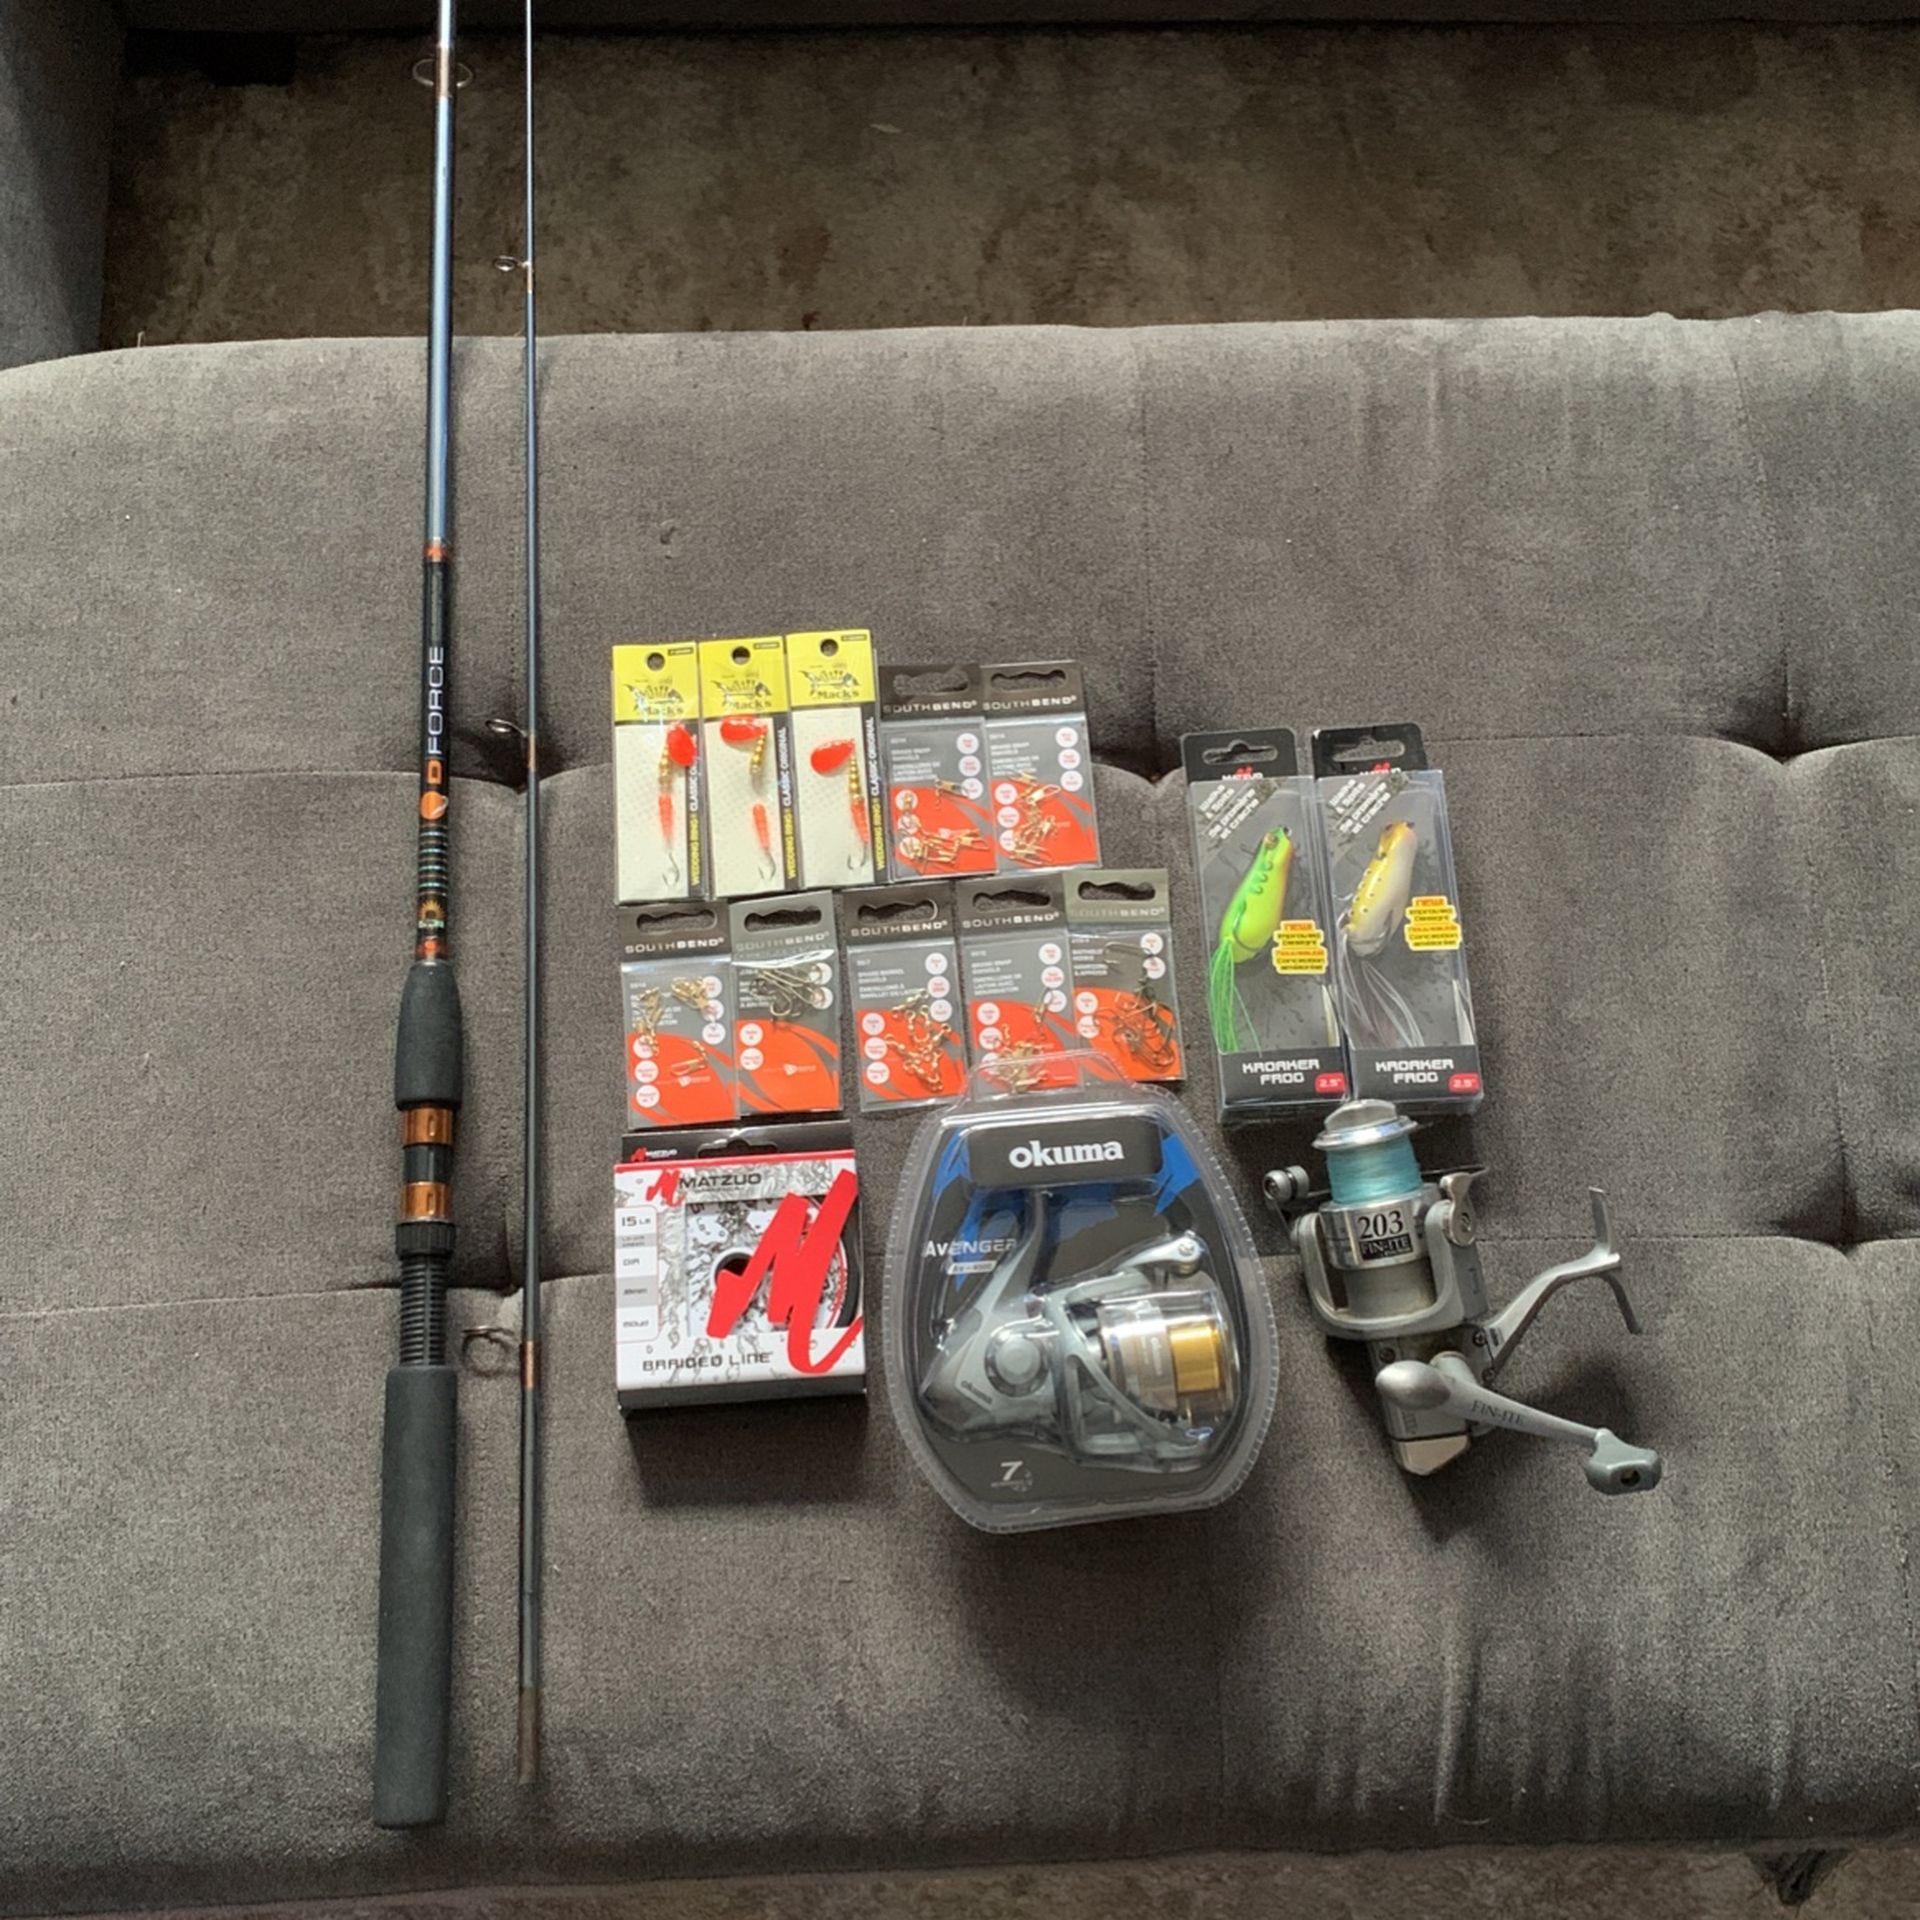 2 Frogs,10 Lewers,15lb Line, Dforce Fishing Rod, 2 Reels, Everything Is Brand New Except The Fishing Rod And The Reel